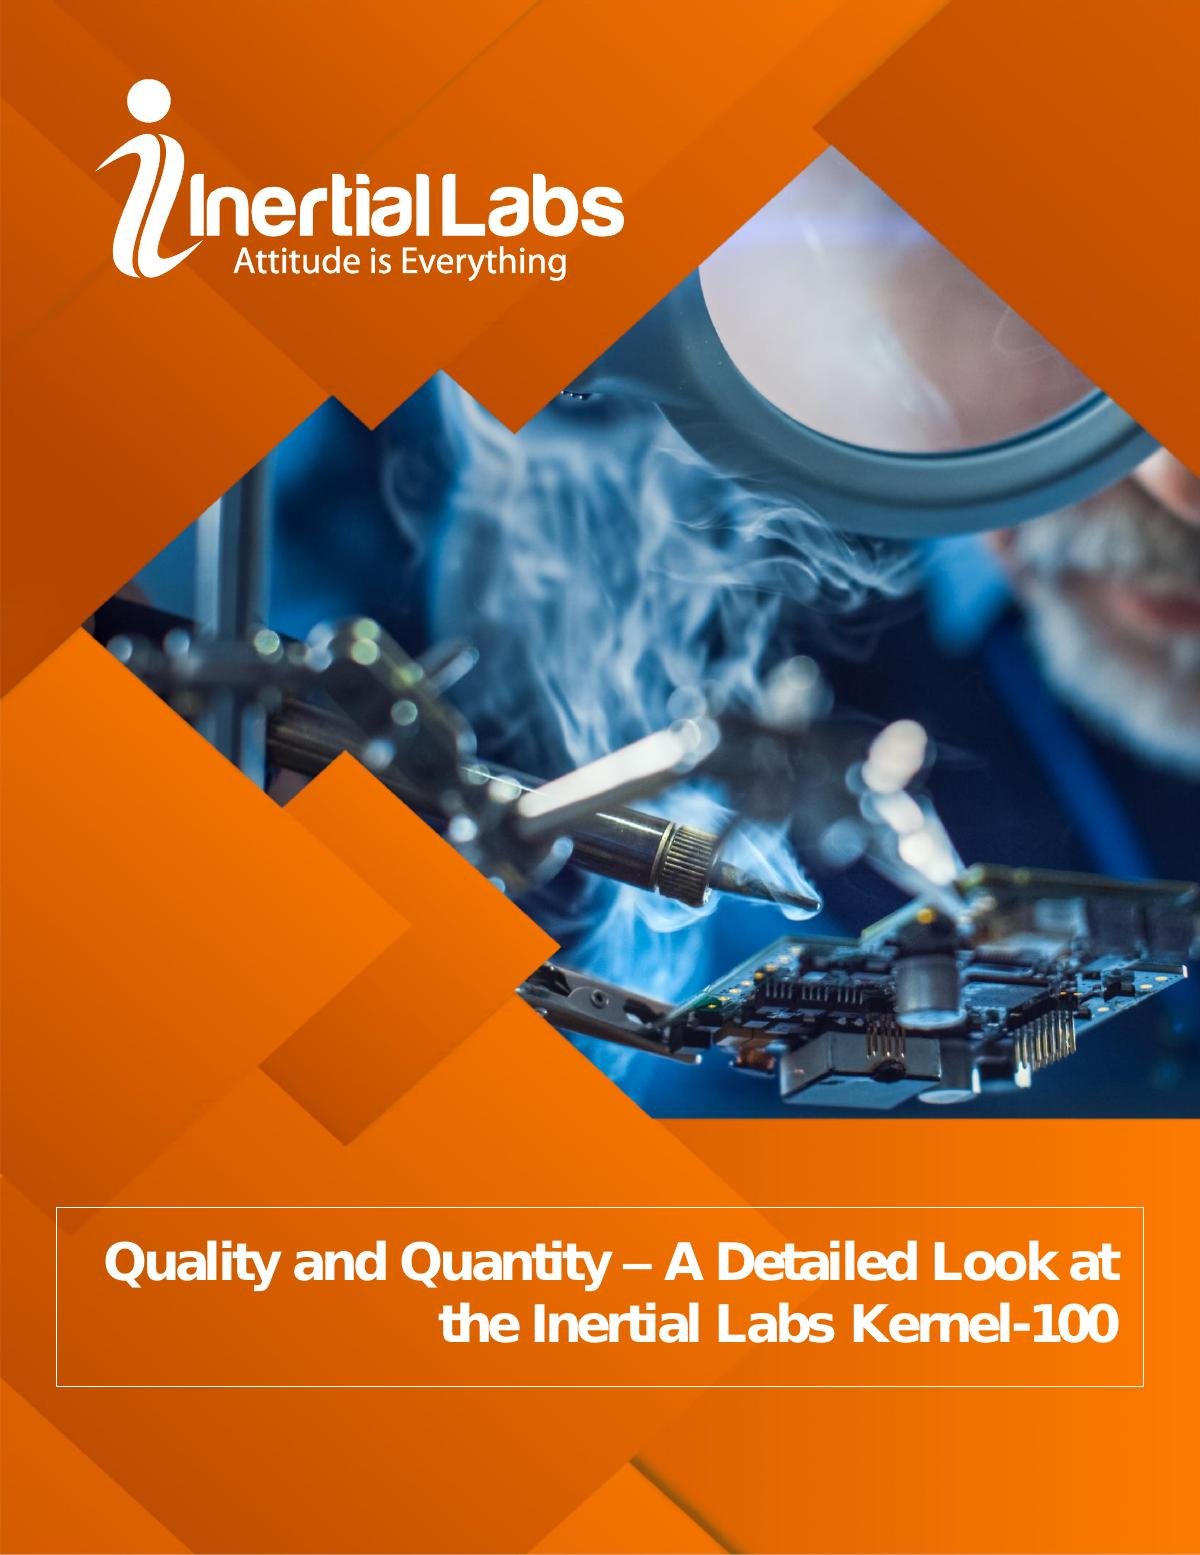 Quality and Quantity — A Detailed Look at the Inertial Labs Kernel-100